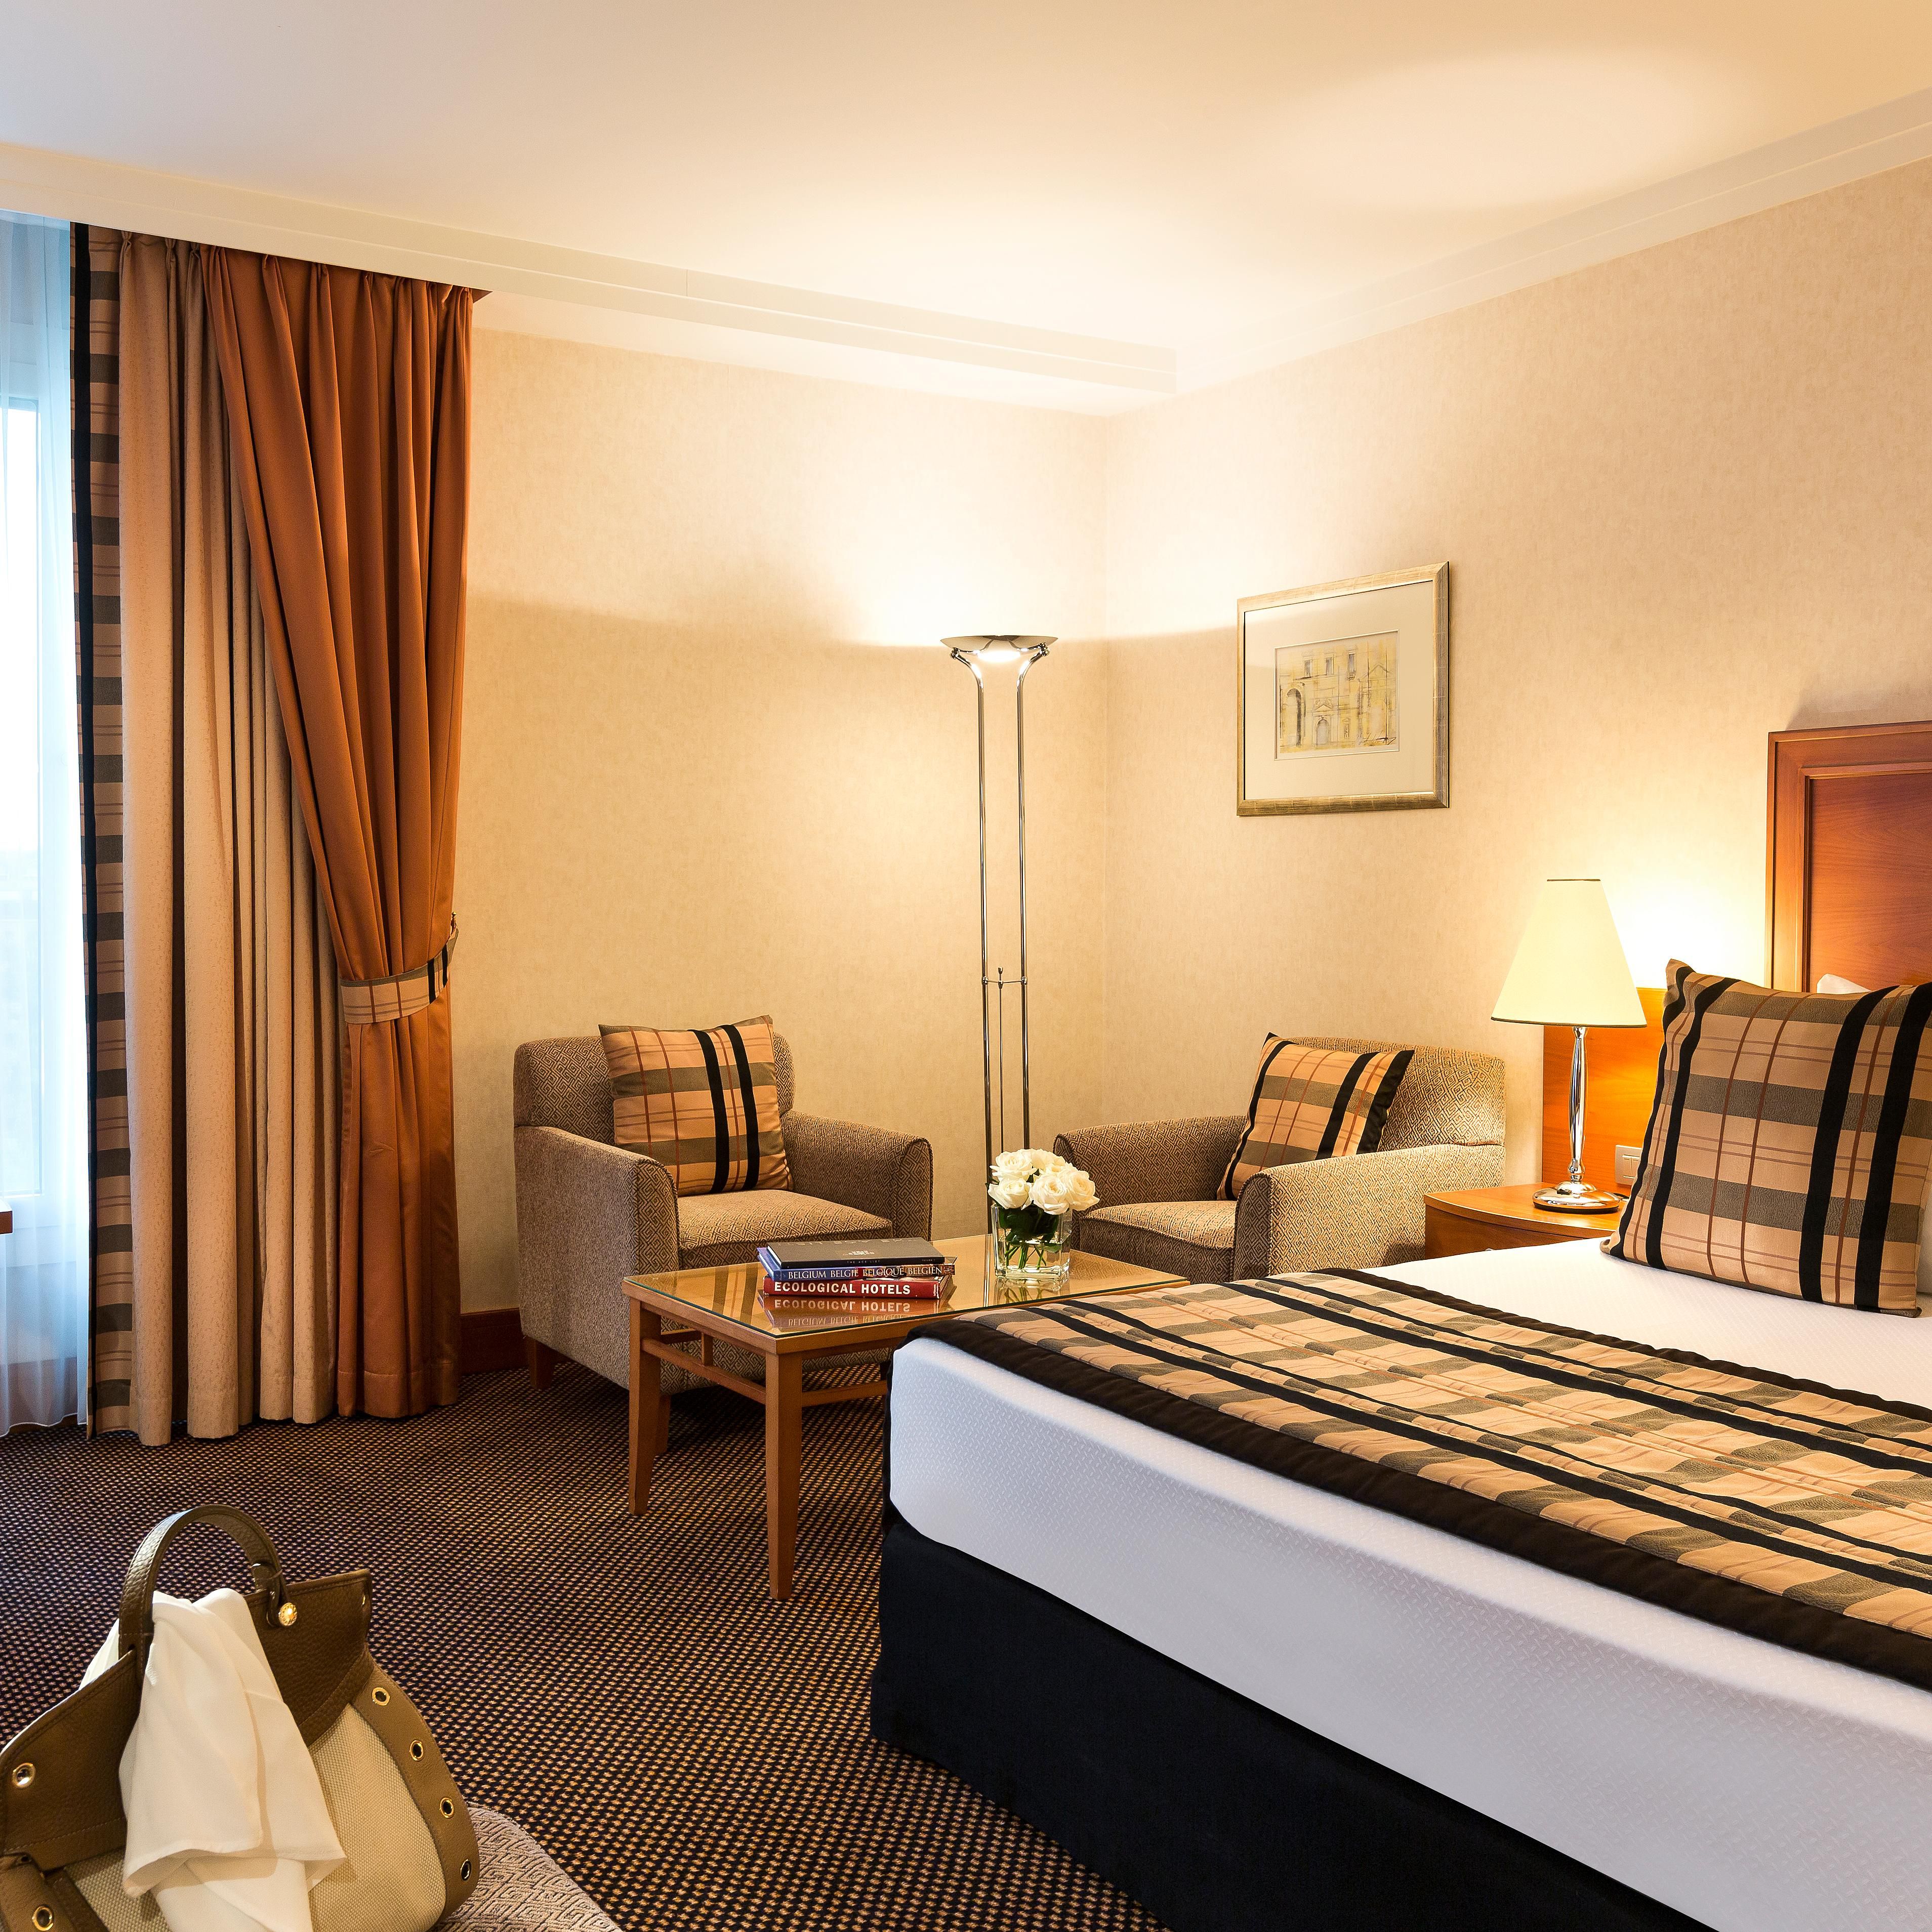 Ideal room for Business or Leisure travel